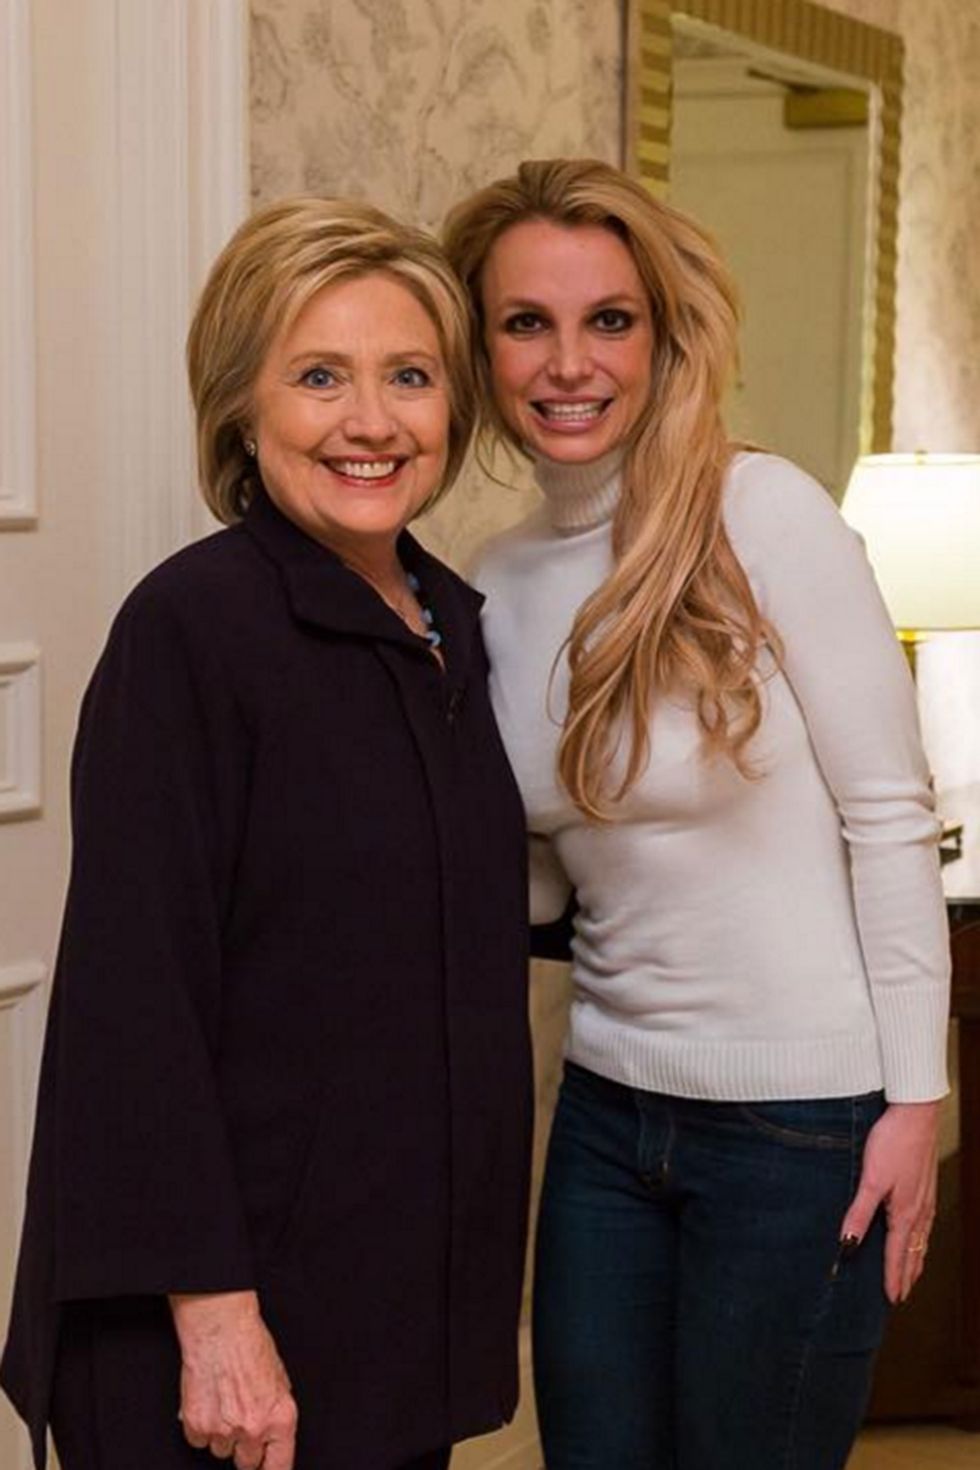 Britney Spears and Hillary Clinton in Las Vegas